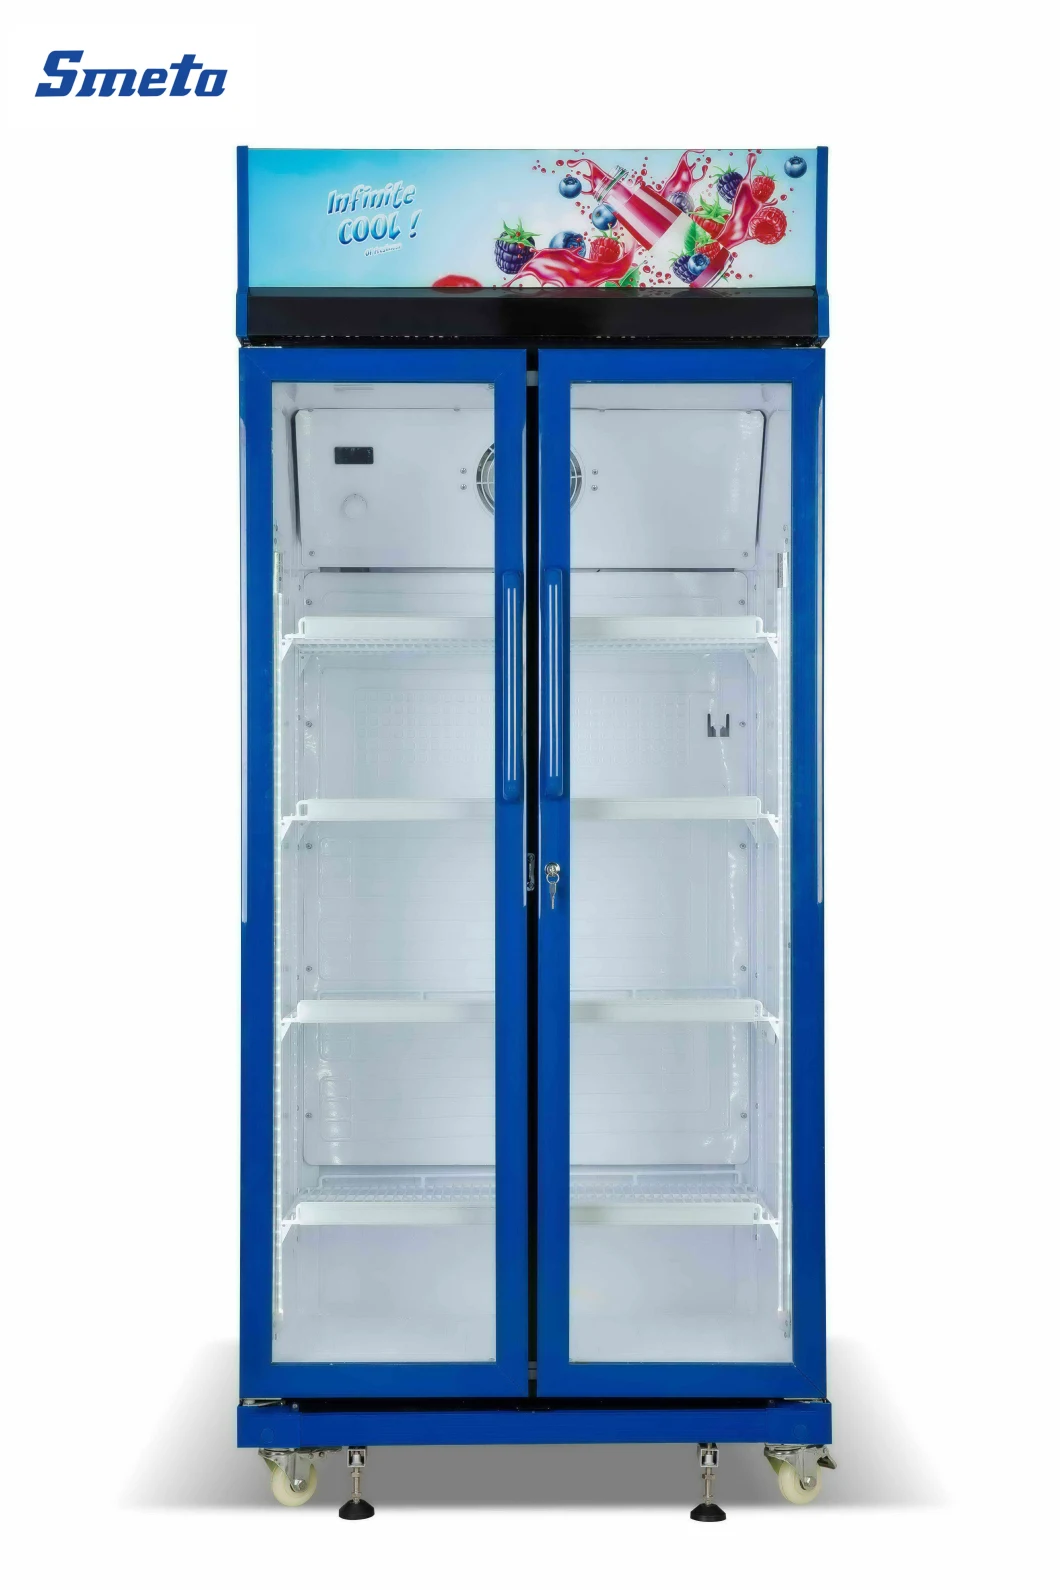 Smeta 560L Double Glass Door No Frost Upright Showcase Cooler